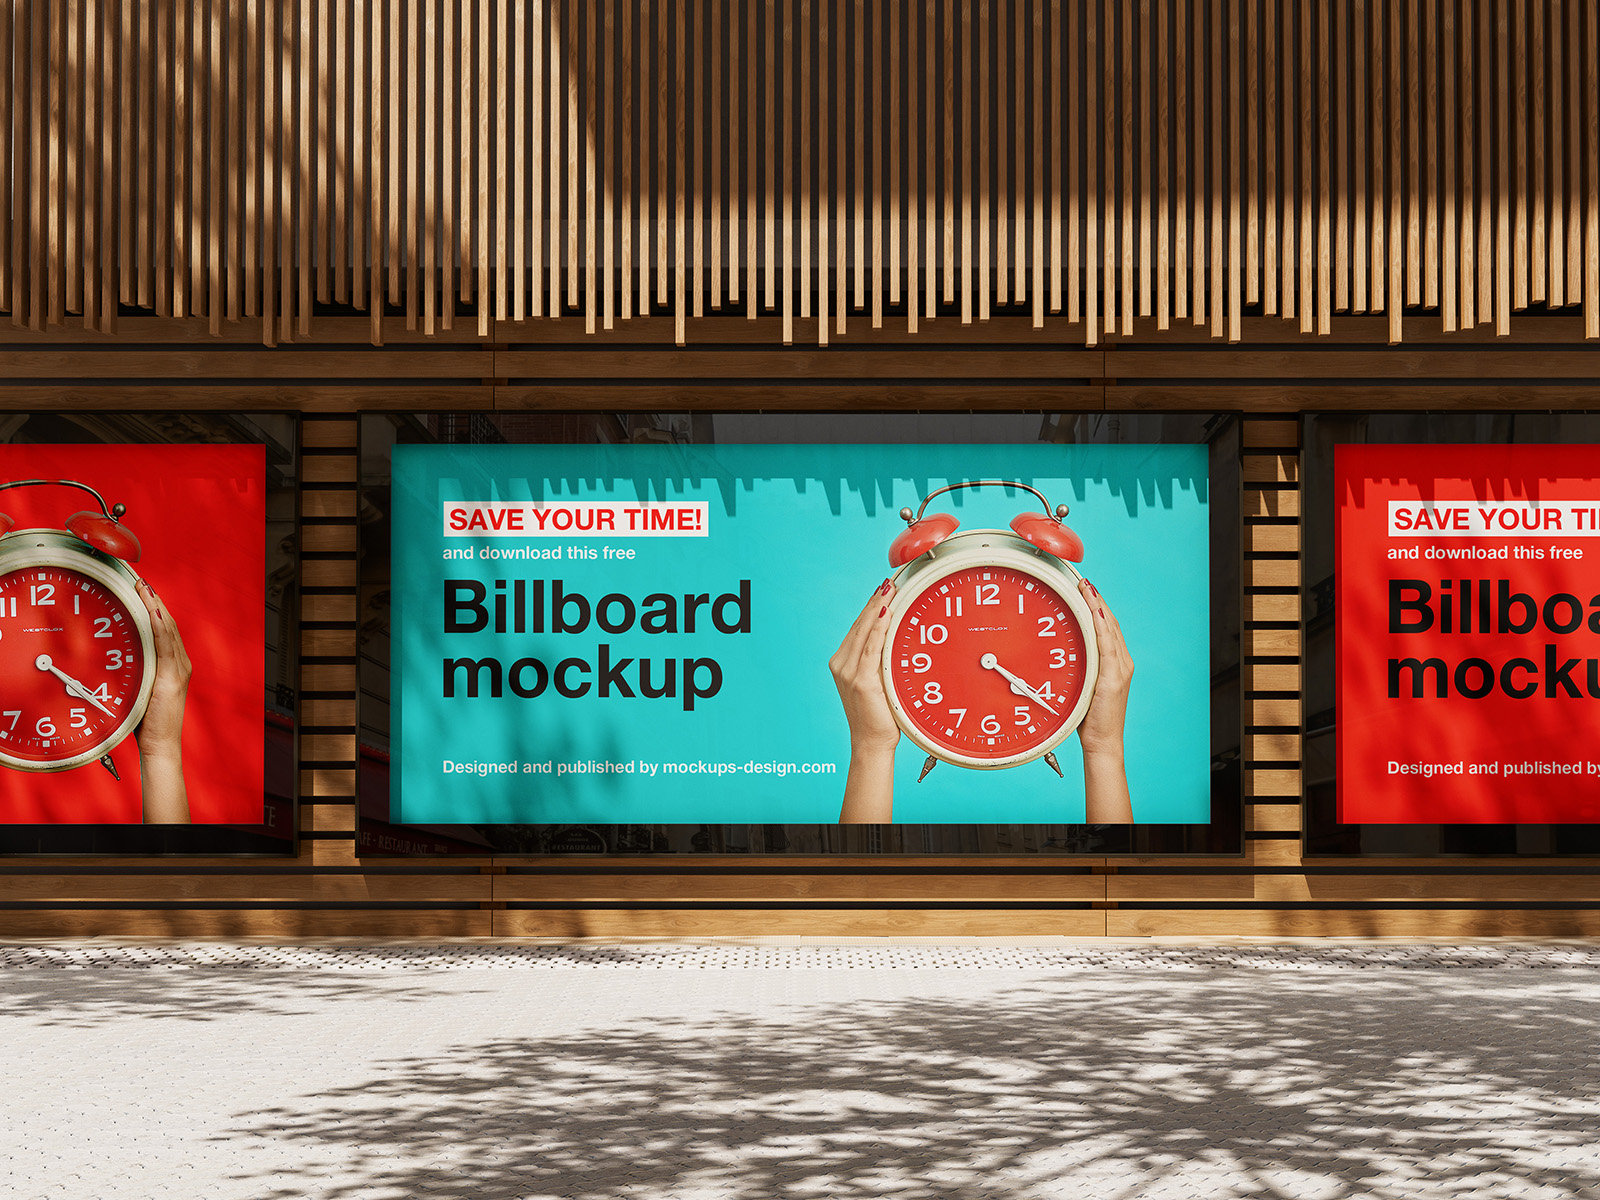 3 Billboard Screen Mockups in Different Visions FREE PSD